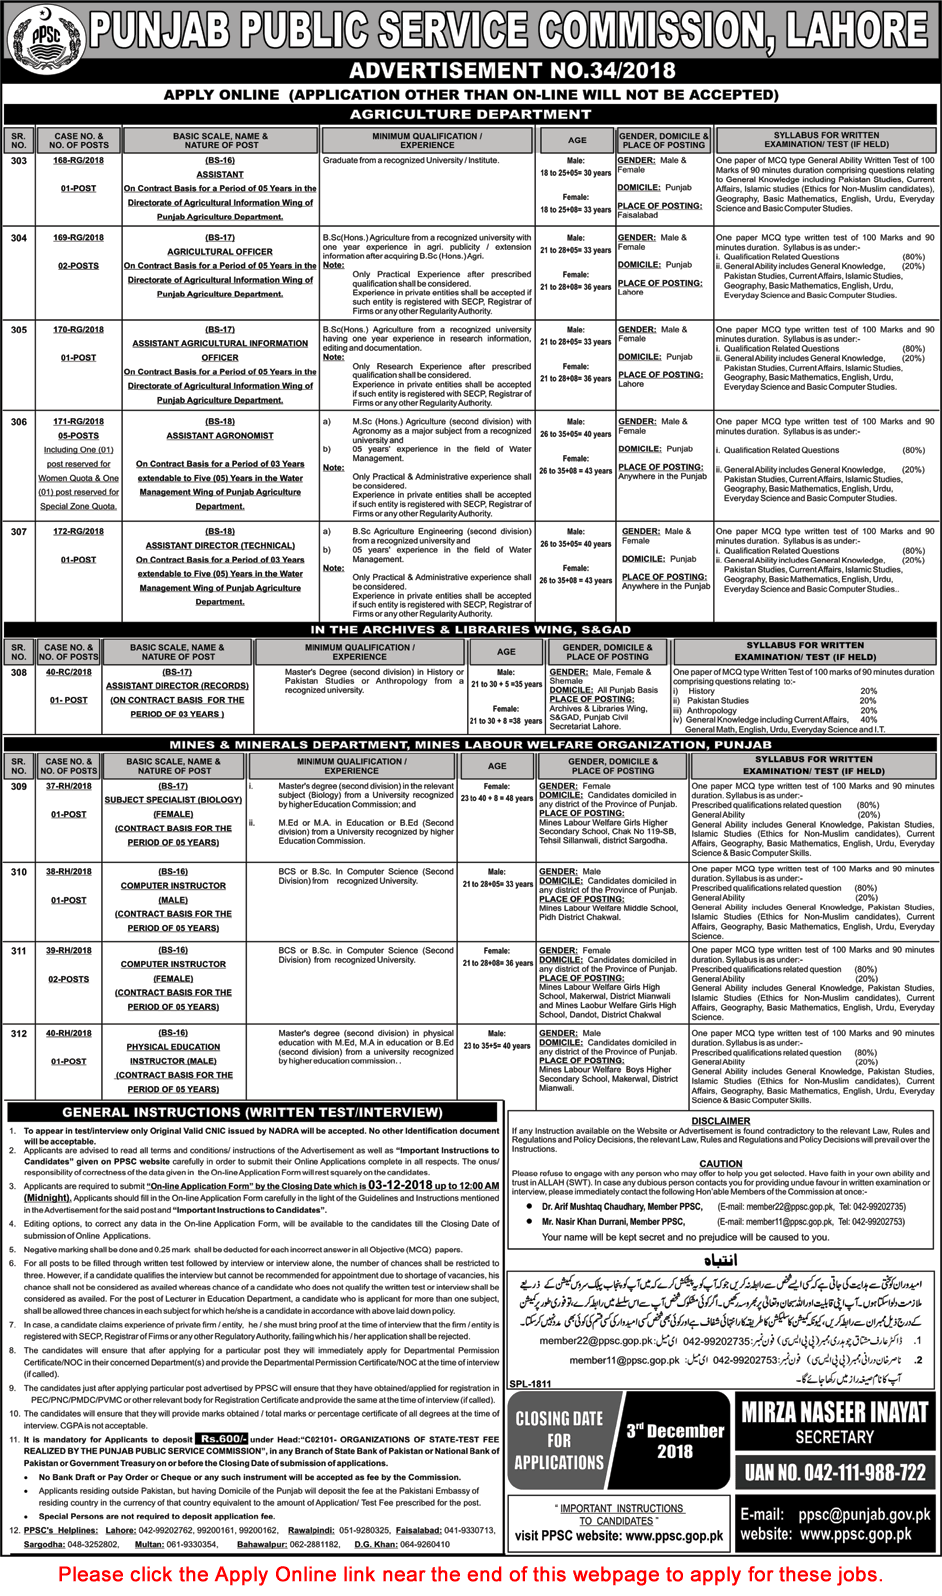 PPSC Jobs November 2018 Apply Online Consolidated Advertisement No 34/2018 Latest